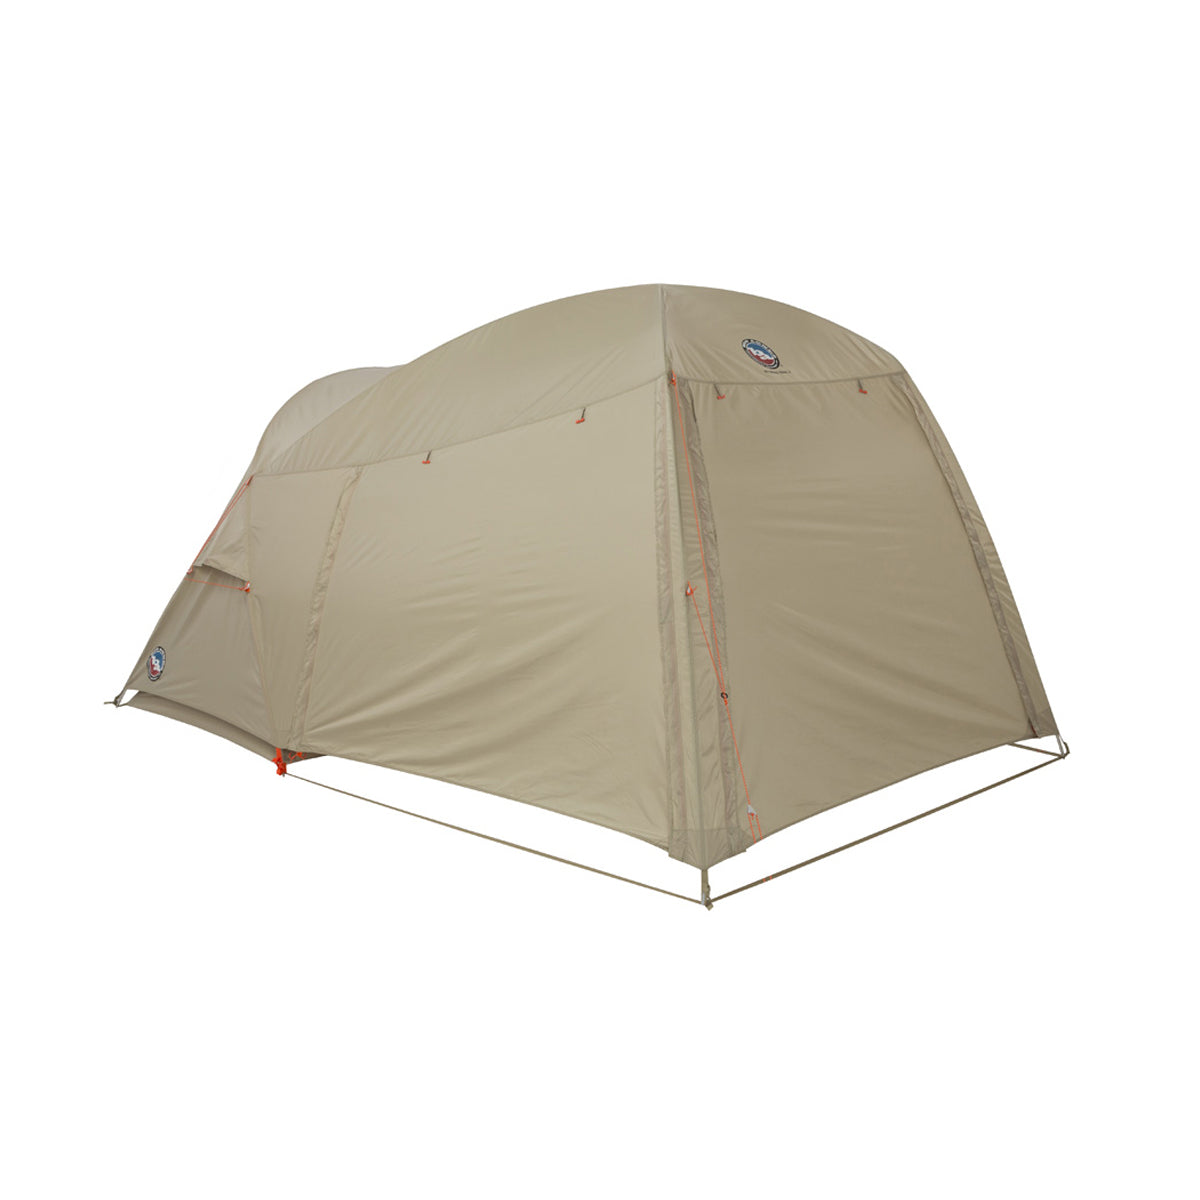 Big Agnes Wyoming Trail 2 Person Tent in  by GOHUNT | Big Agnes - GOHUNT Shop